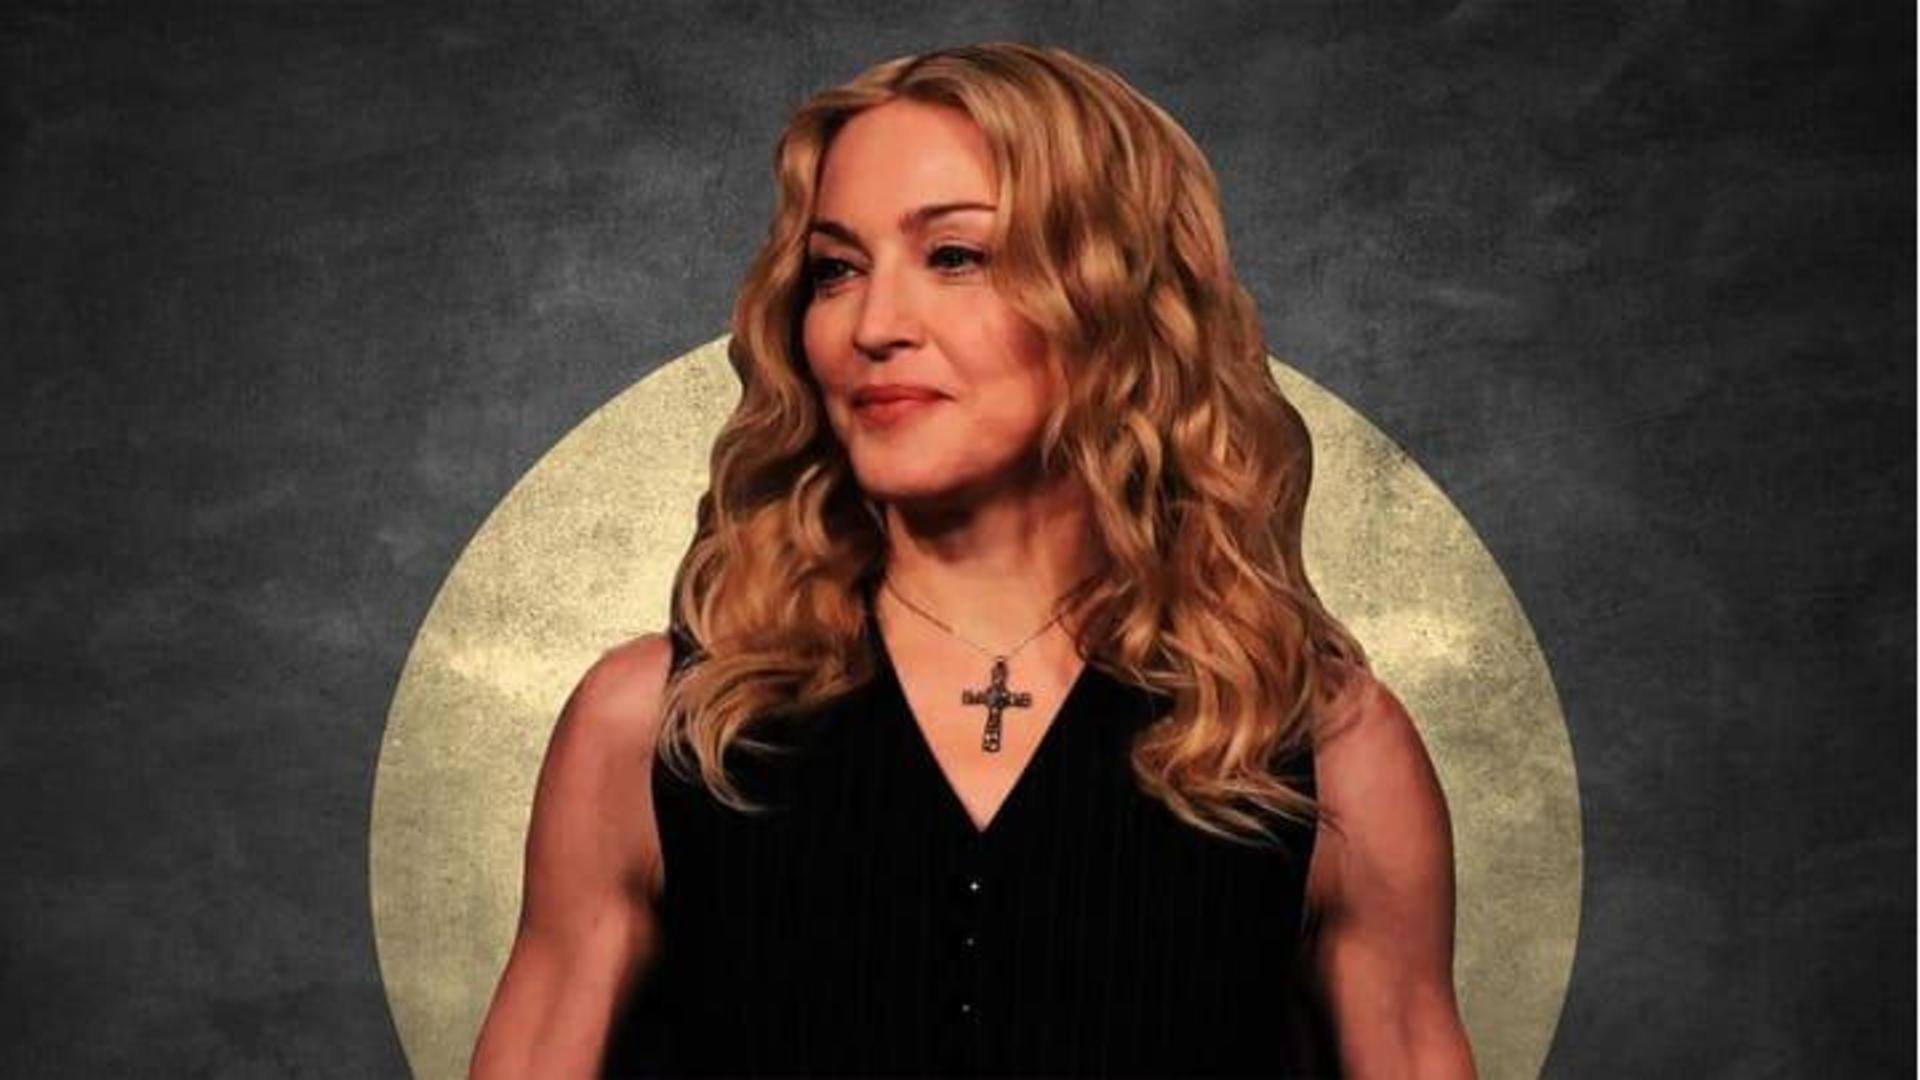 After 'serious bacterial infection,' Madonna is 'resting, feeling better'